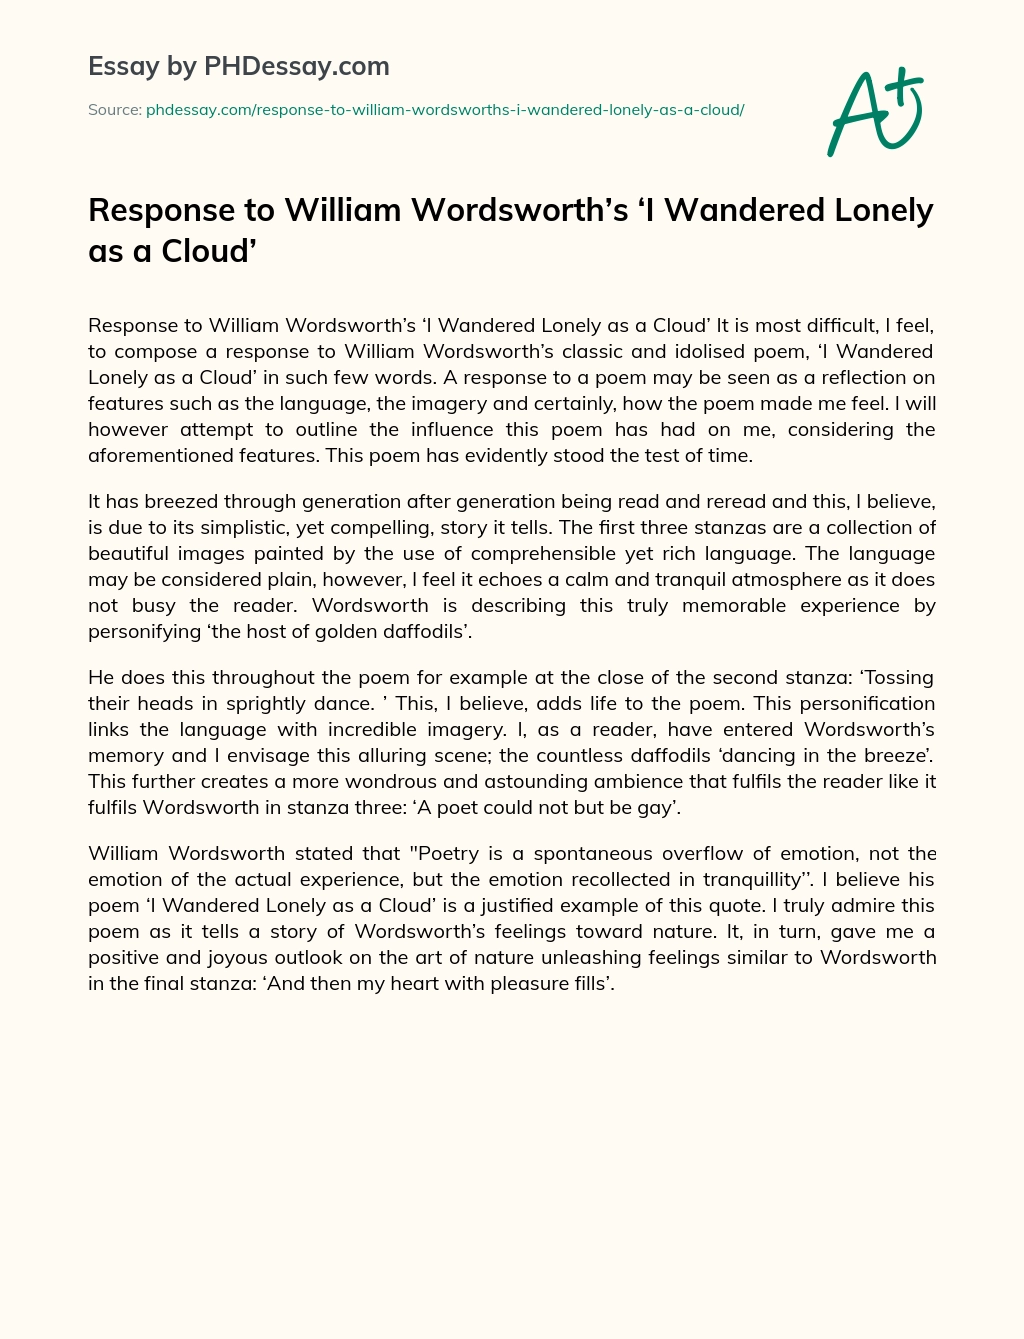 Response to William Wordsworth’s ‘I Wandered Lonely as a Cloud’ essay